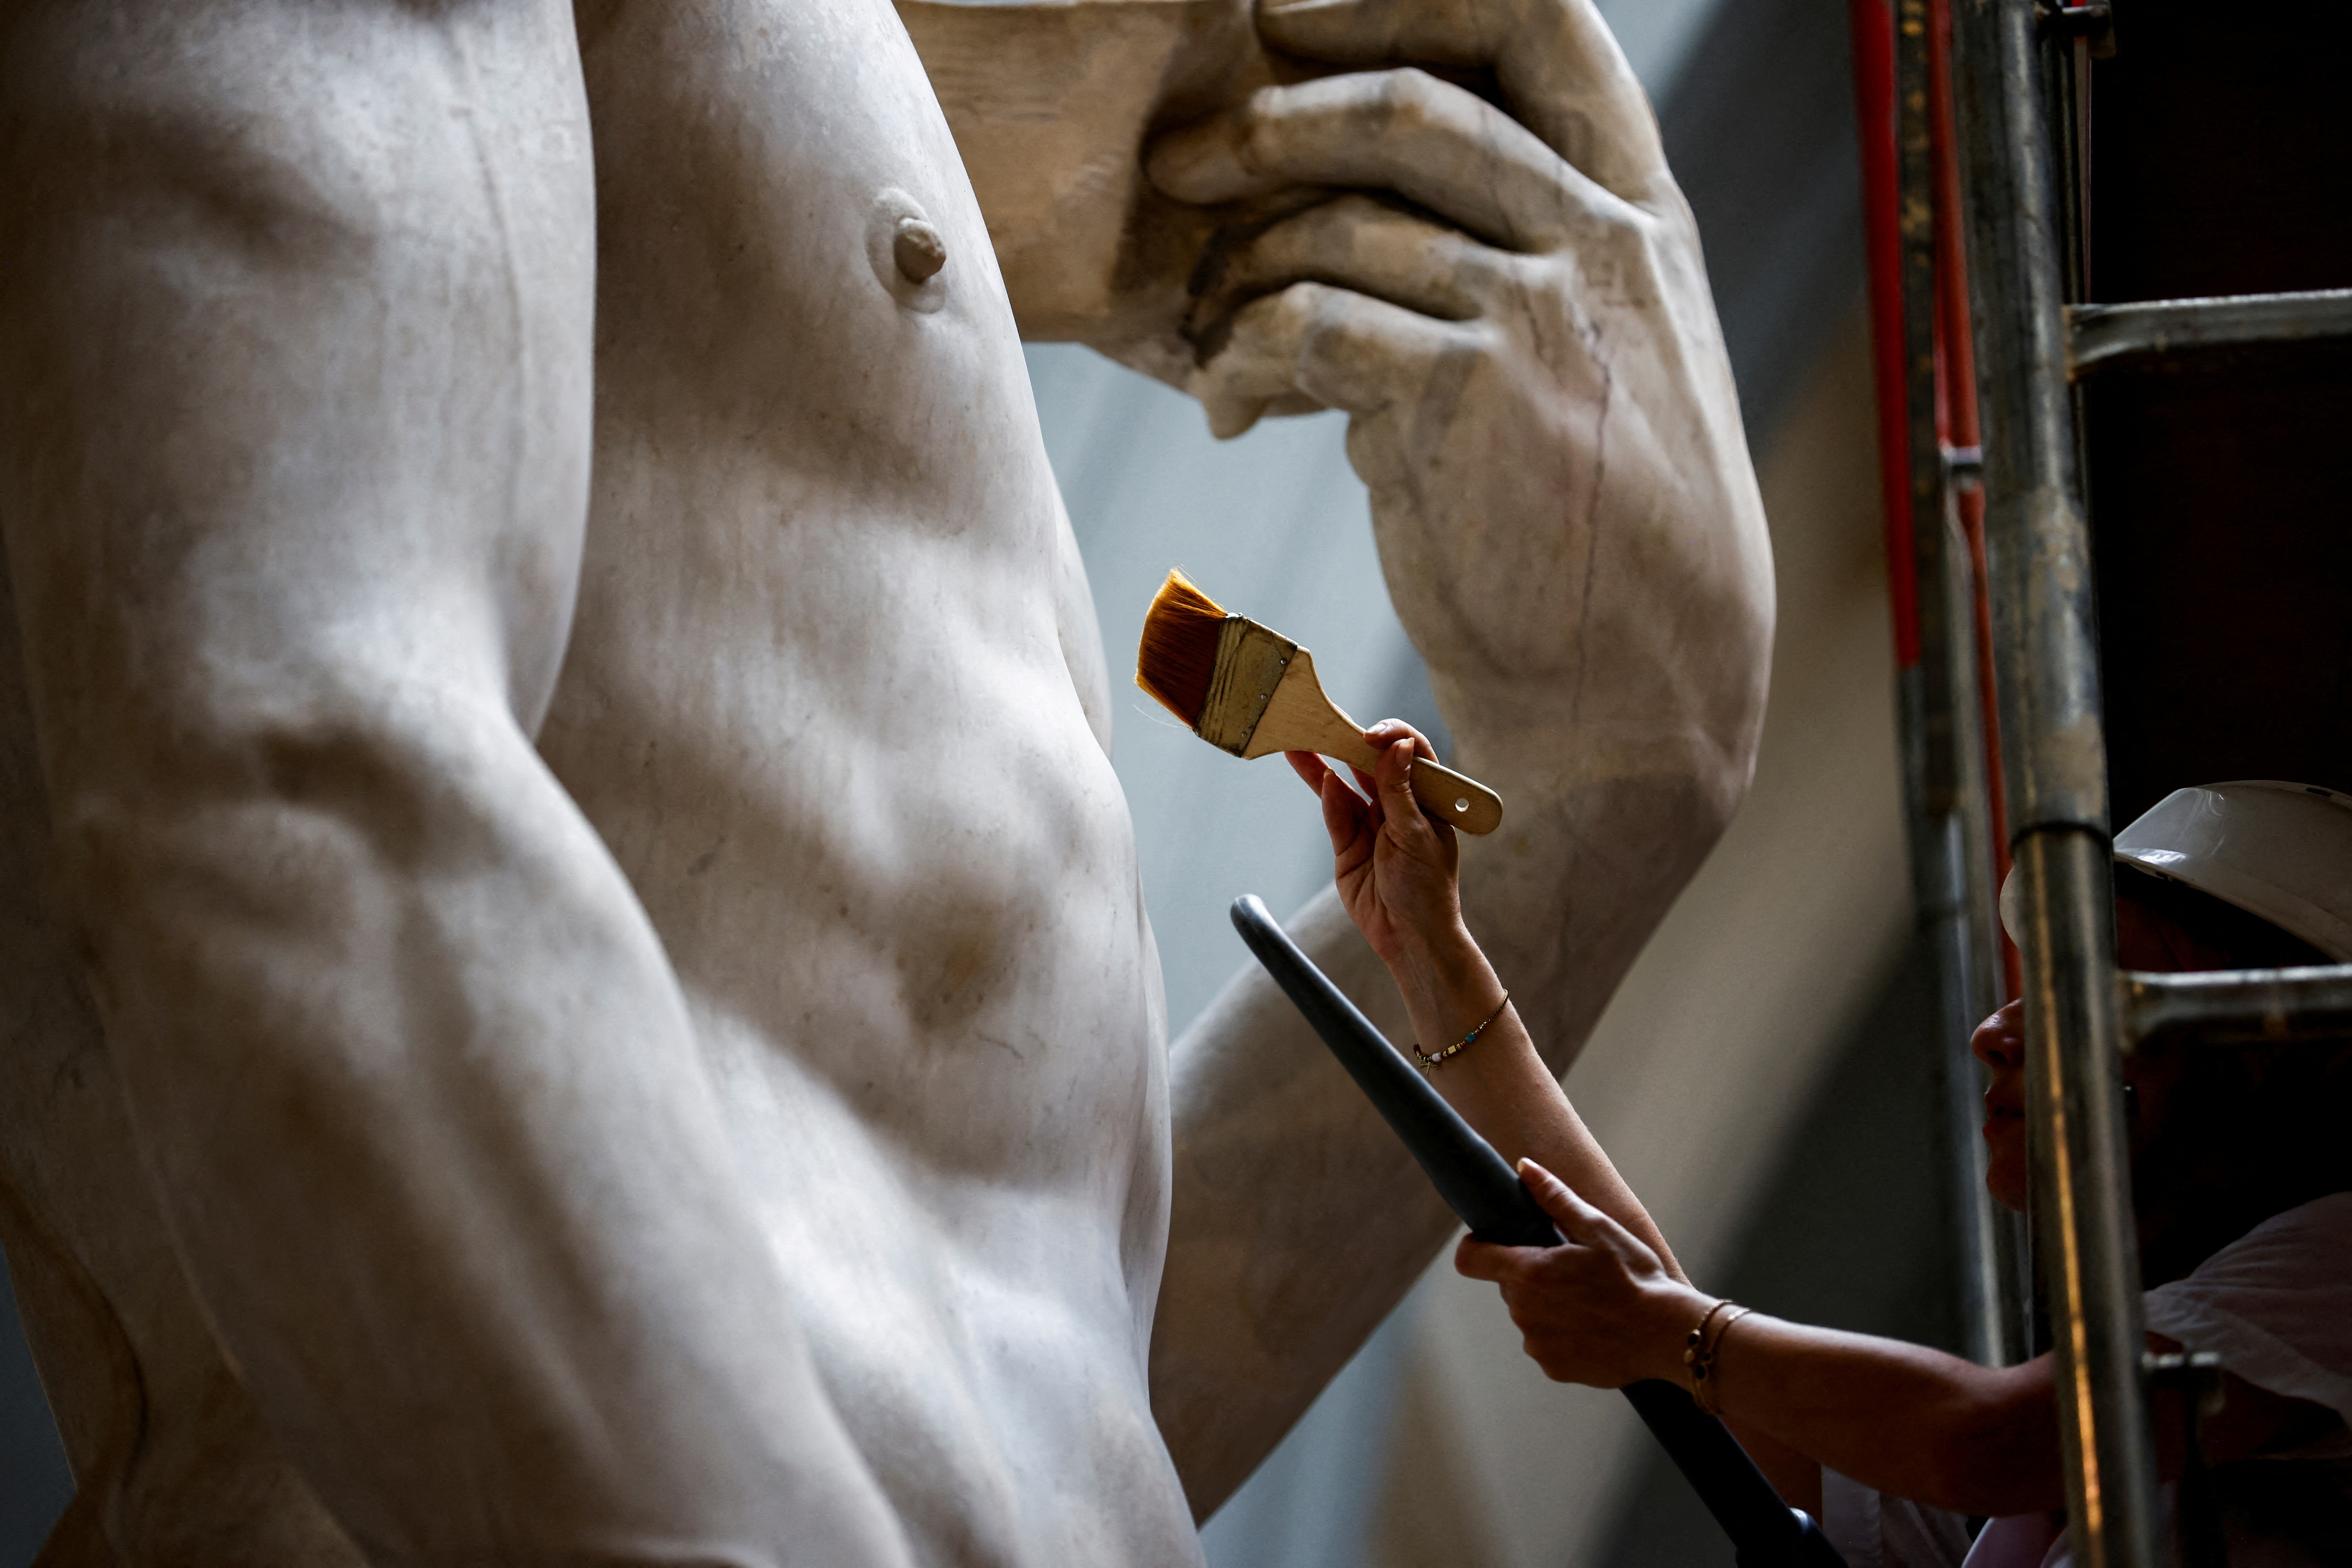 In 1843 the statue was damaged when hydrochloric acid was used to restore the marble masterpiece. But now, sensitive brushes and other instruments are used that avoid touching the marble. /Yara Nardi/Reuters